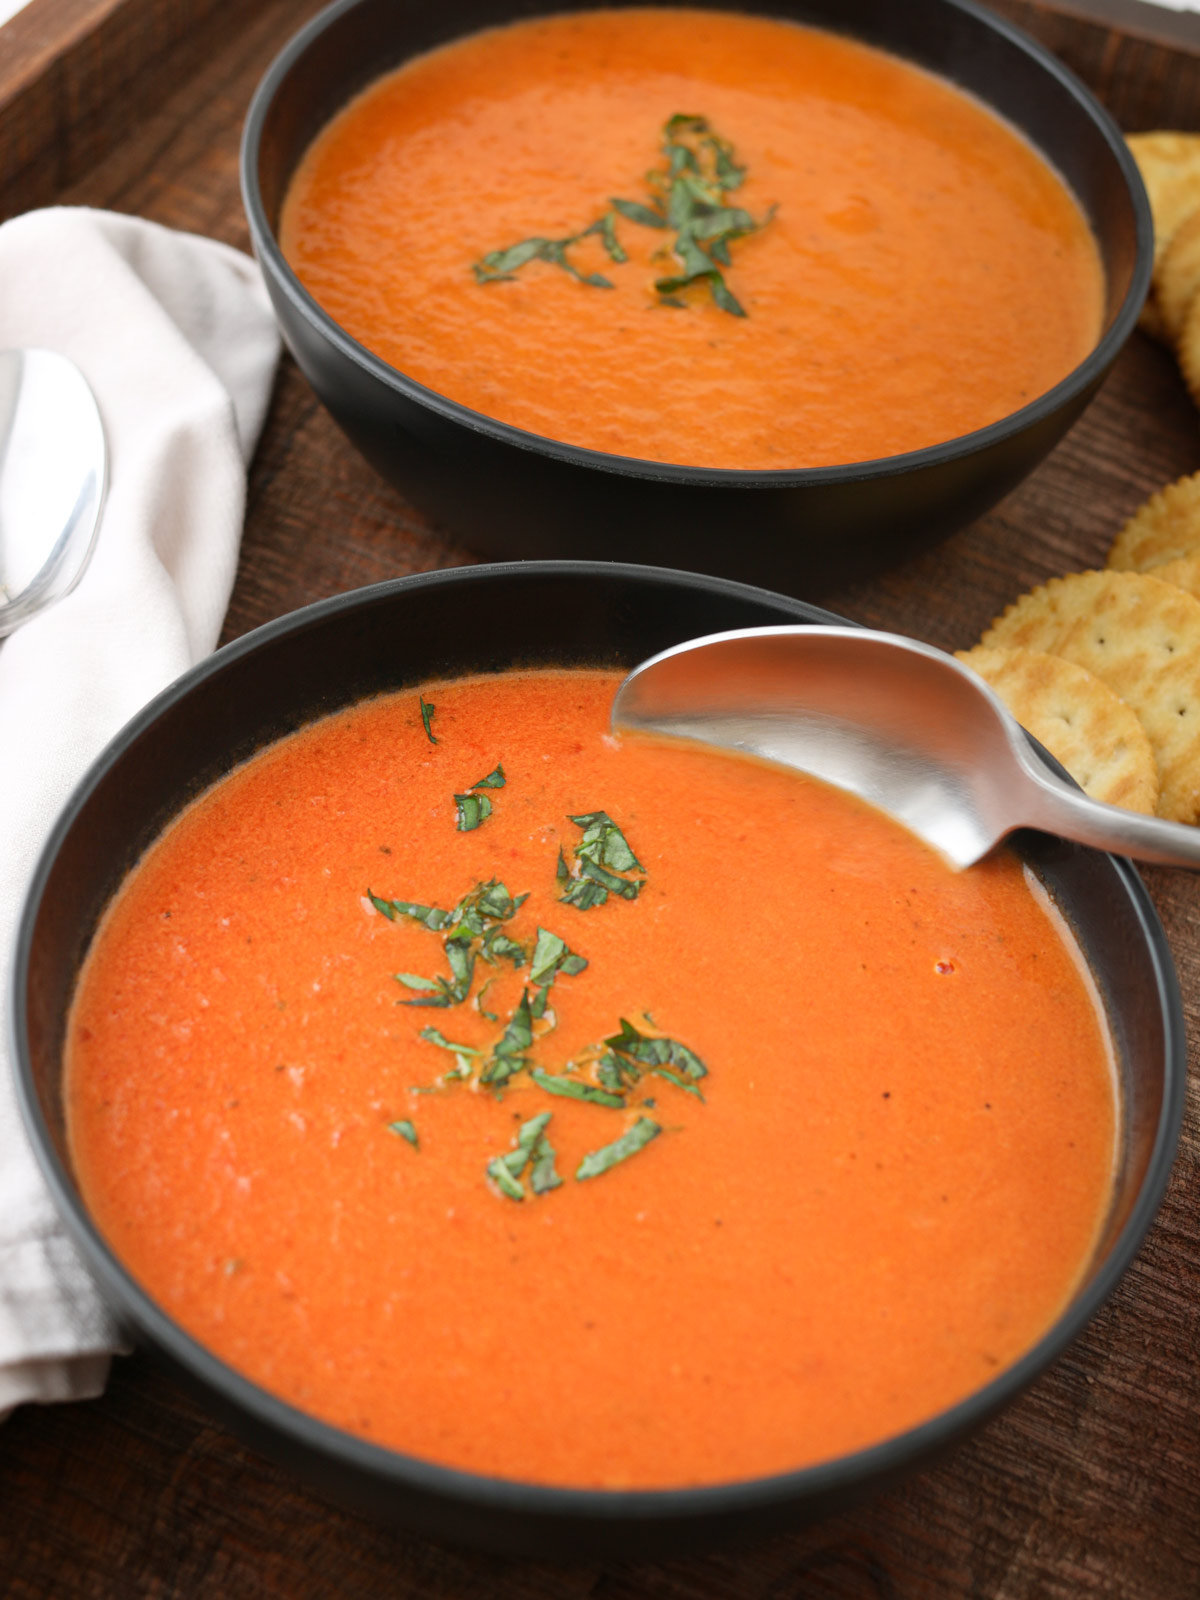 dipping a spoon into tomato soup in black bowl.